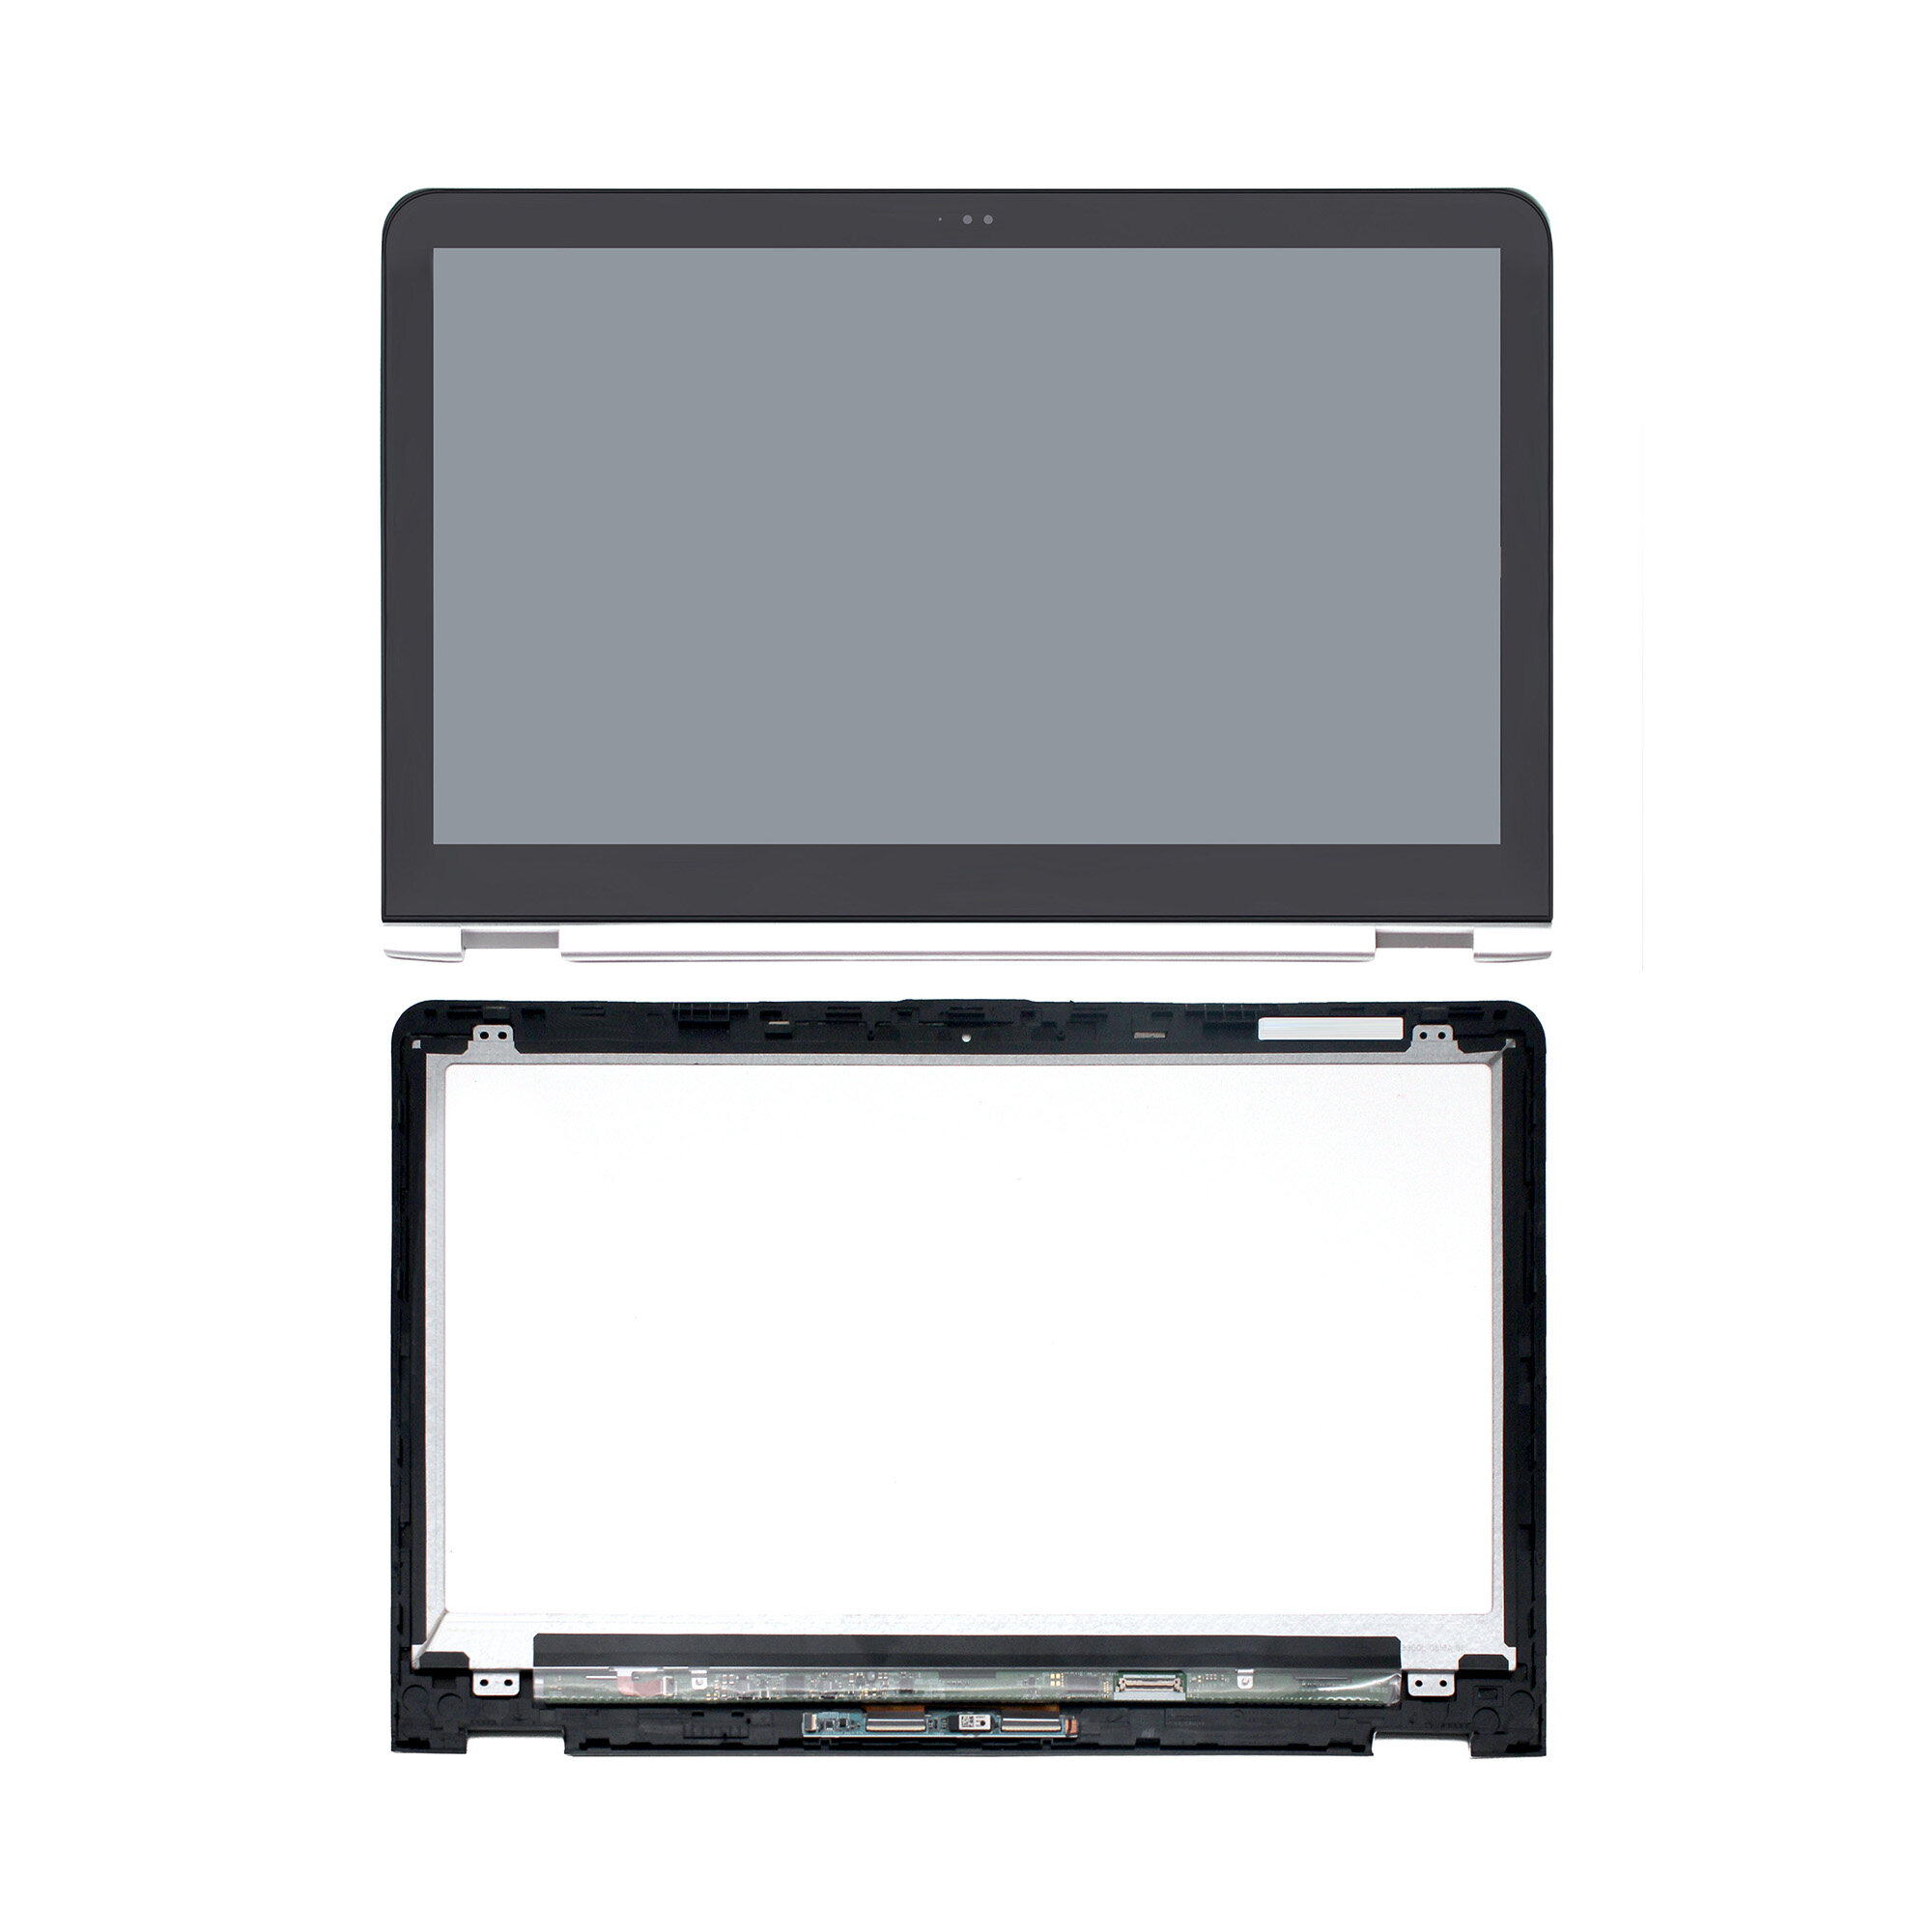 Kreplacement LCD Touch Screen Assembly For HP Envy x360 15-AQ018CA 15-AQ110NR 15-AQ155NR 15-AQ156NR 15-aq001nx 15-AQ273CL 15-aq160sa